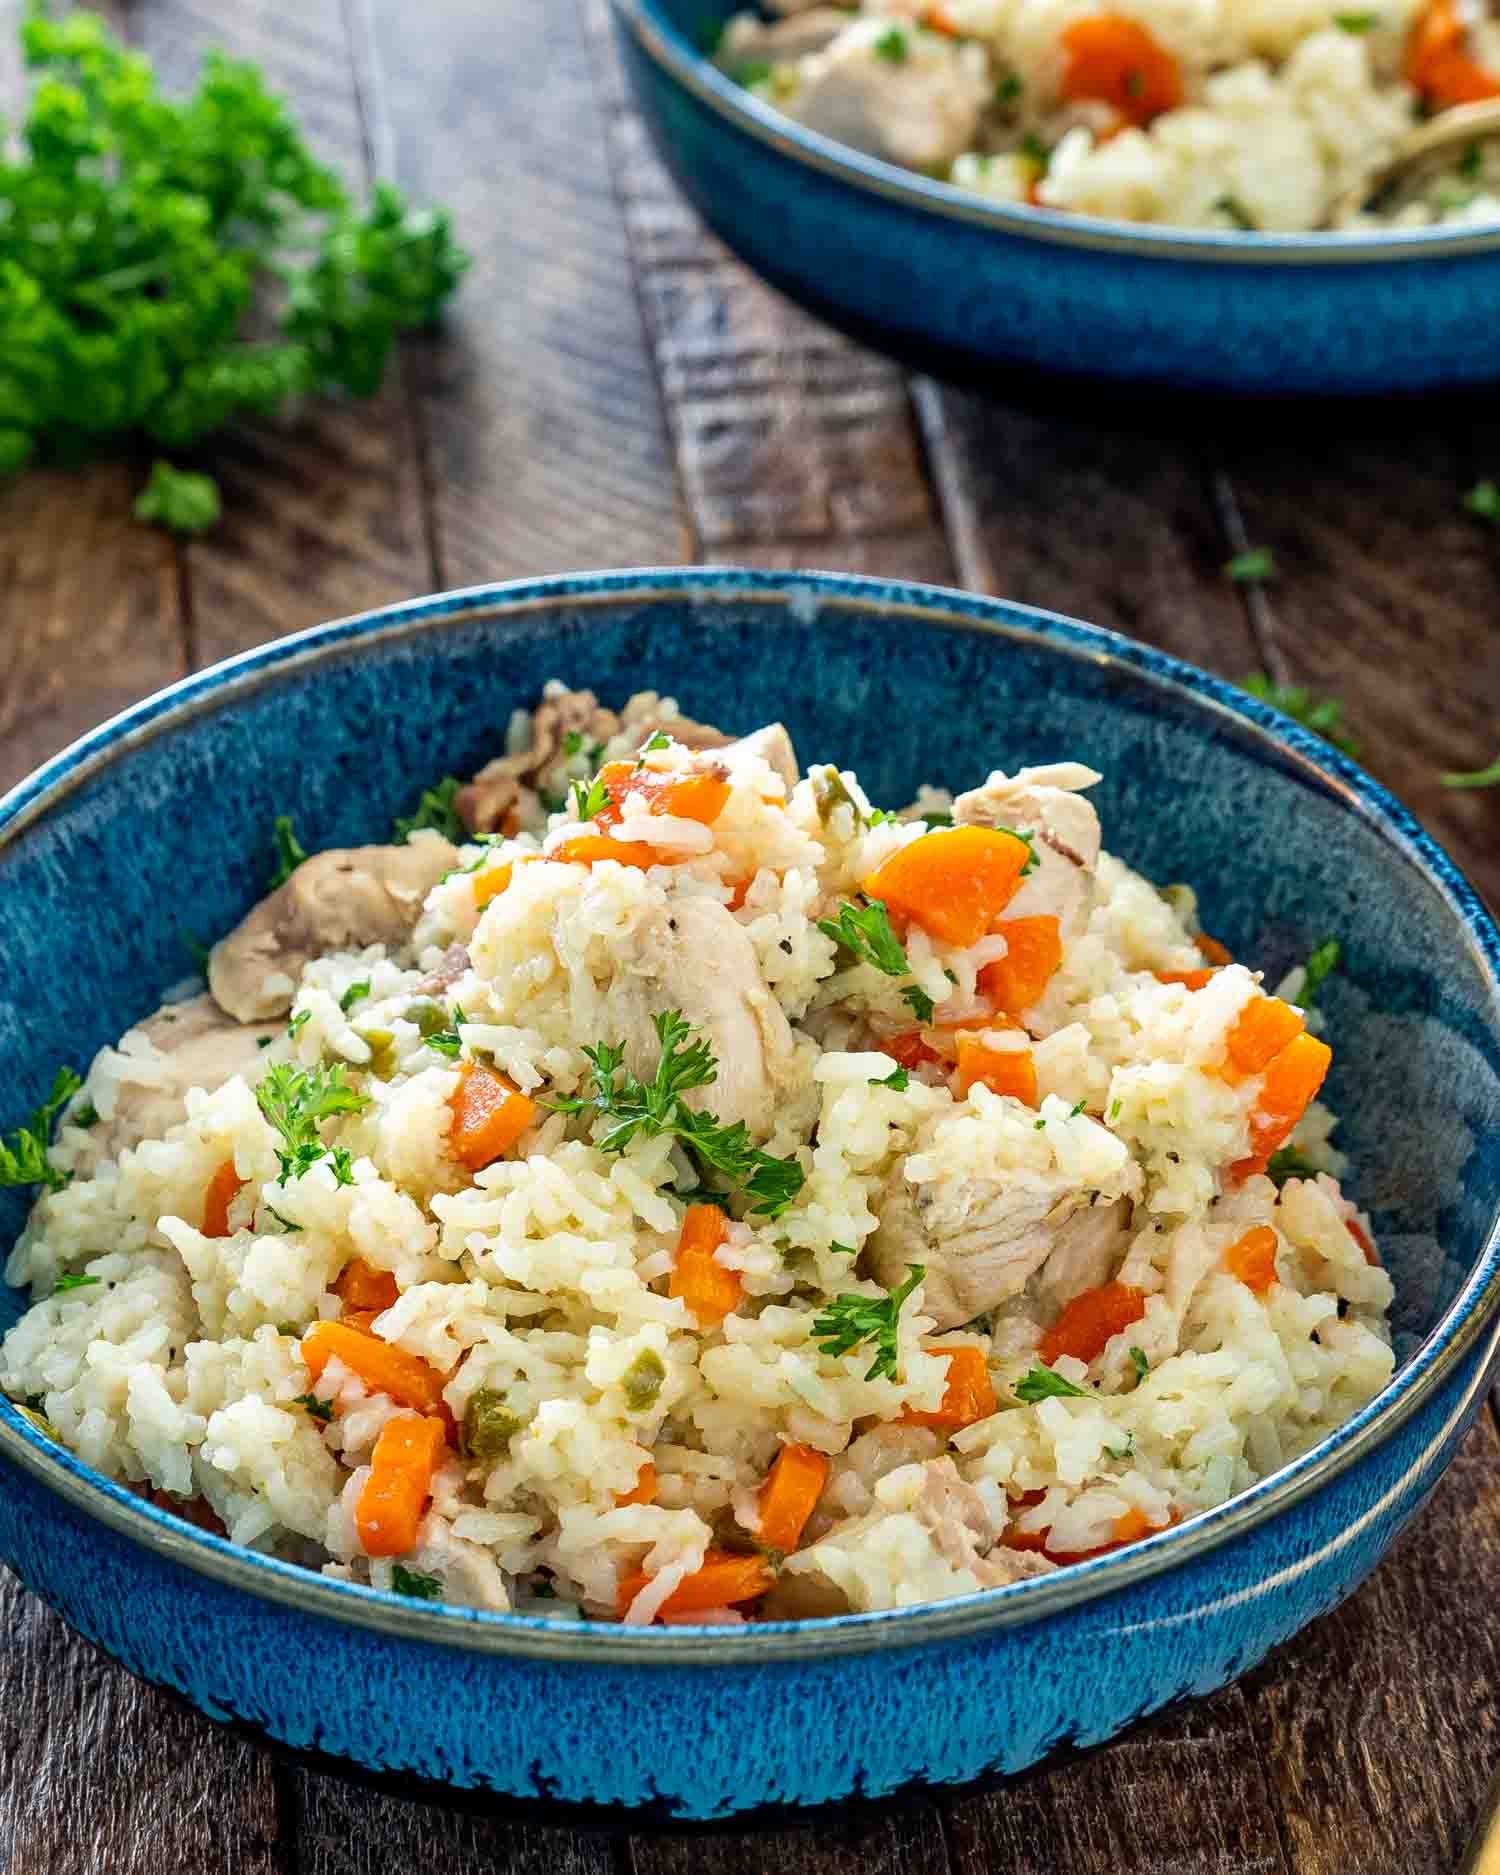 chicken and rice made in the instant pot in a blue bowl garnished with parsley.